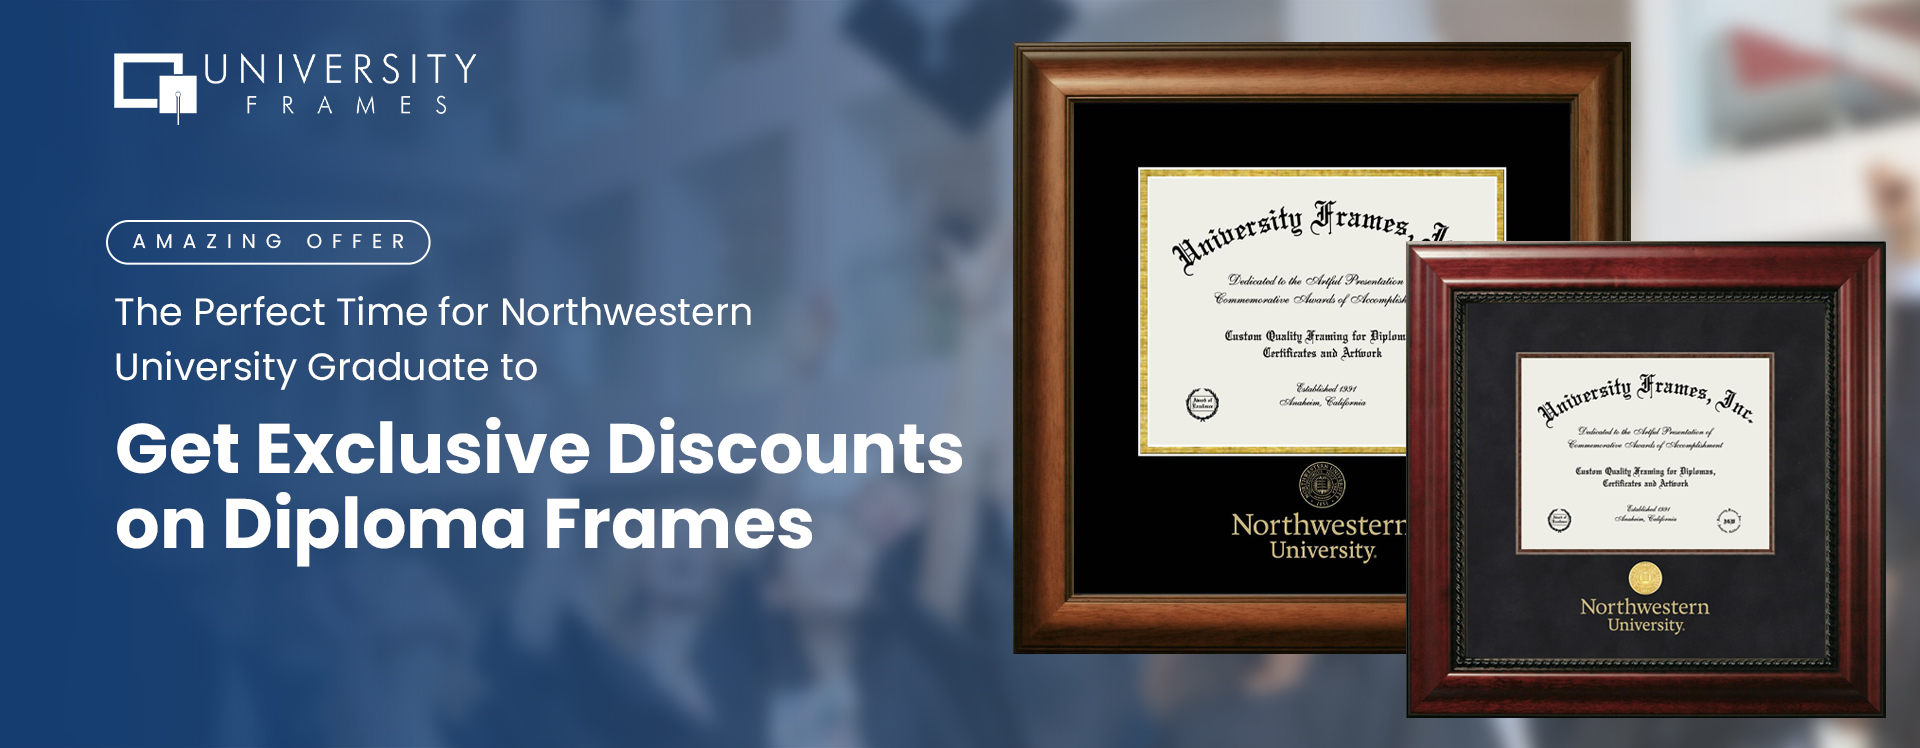 The Perfect Time for Northwestern University Graduates to Get Exclusive Discounts on Diploma Frames